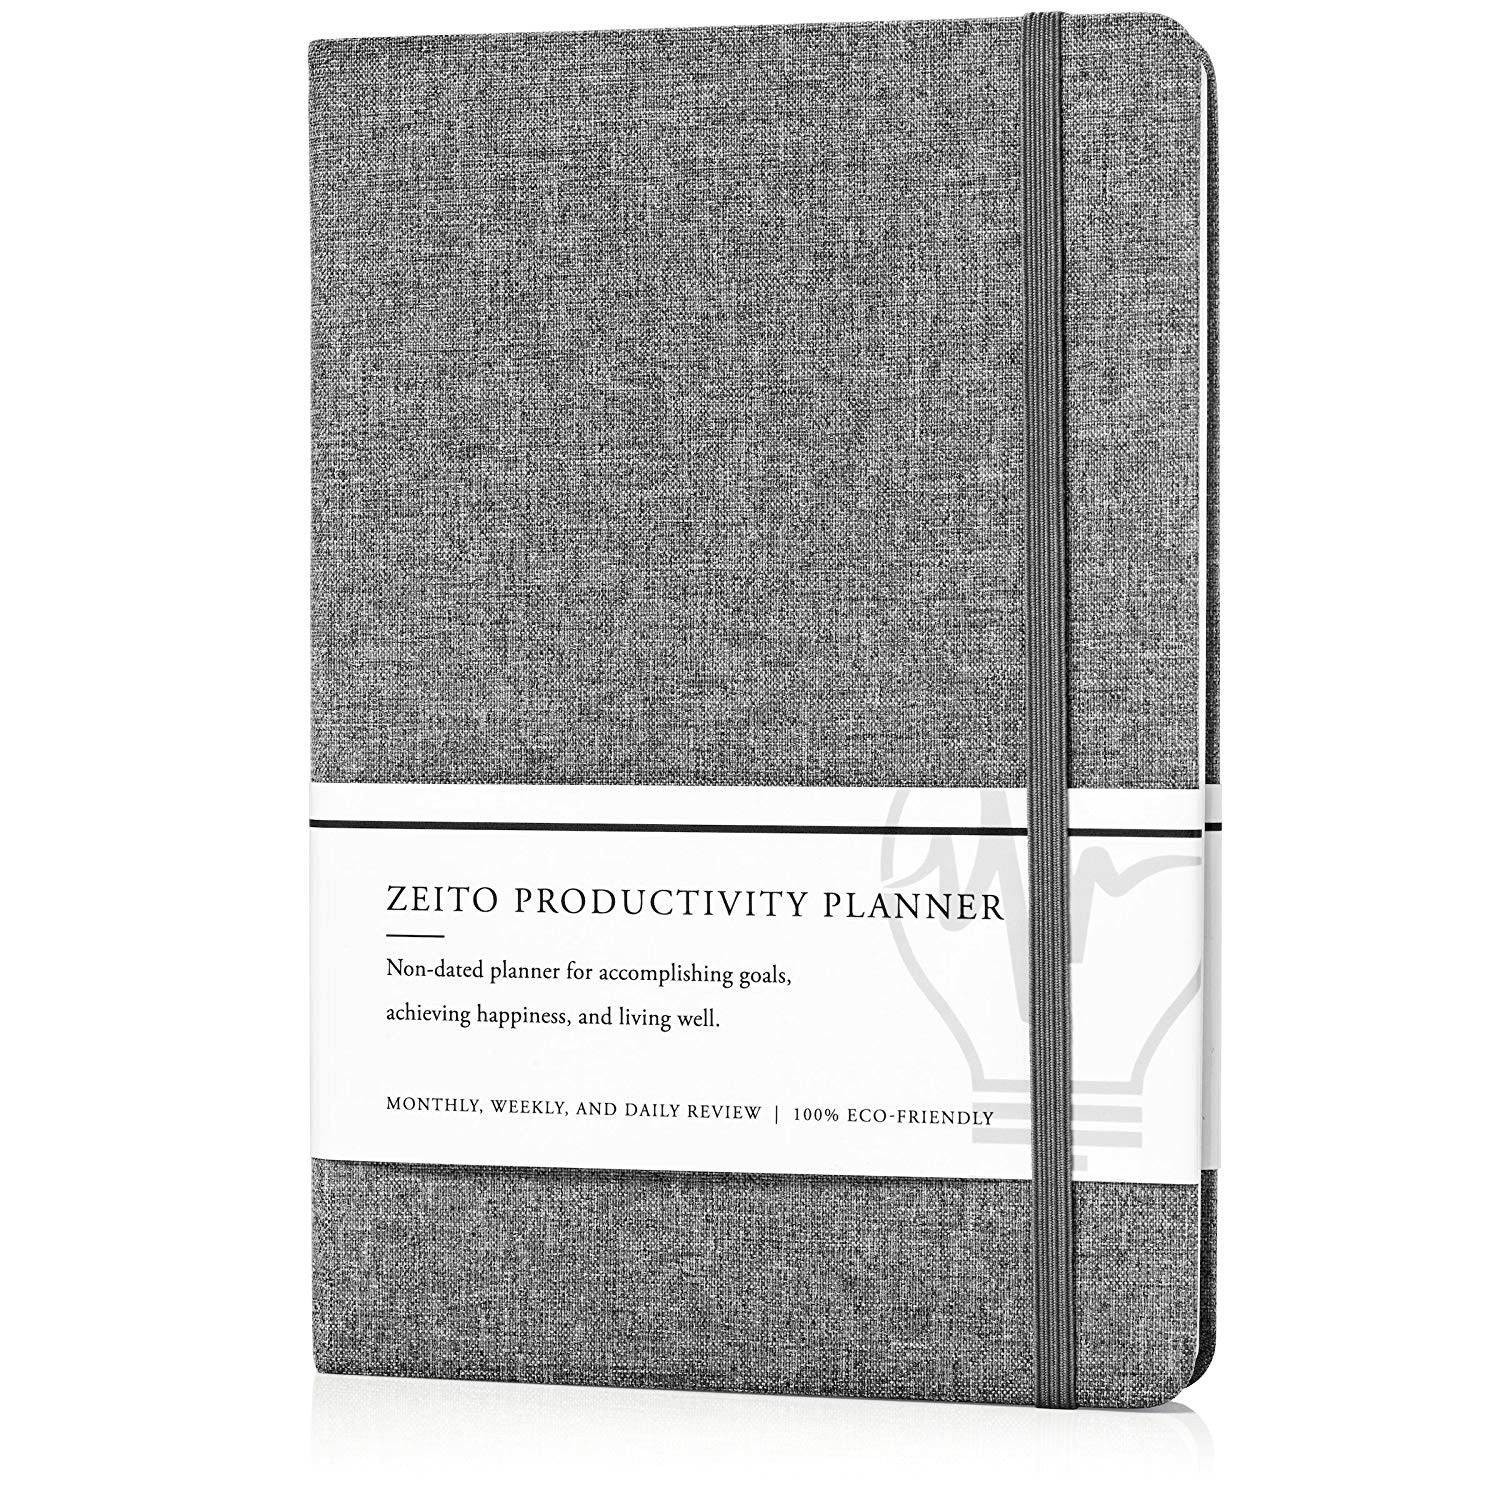 amazon com zeito productivity planner best undated monthly weekly and daily agenda planner for increasing motivation accomplishing goals and living